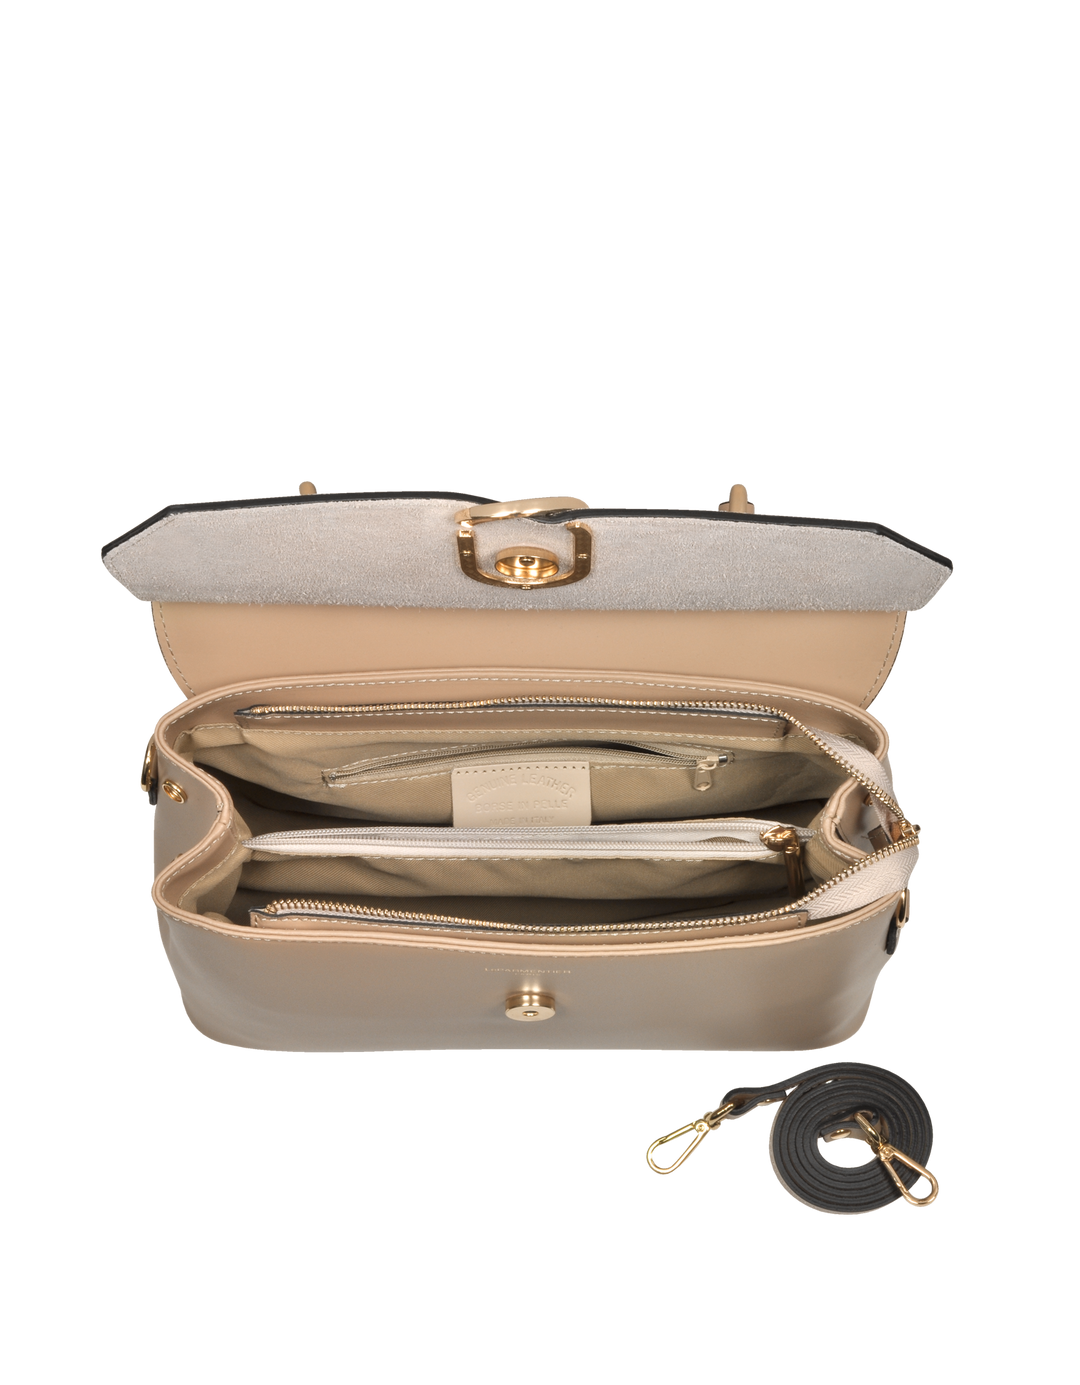 Open beige leather handbag showing multiple compartments and detachable strap